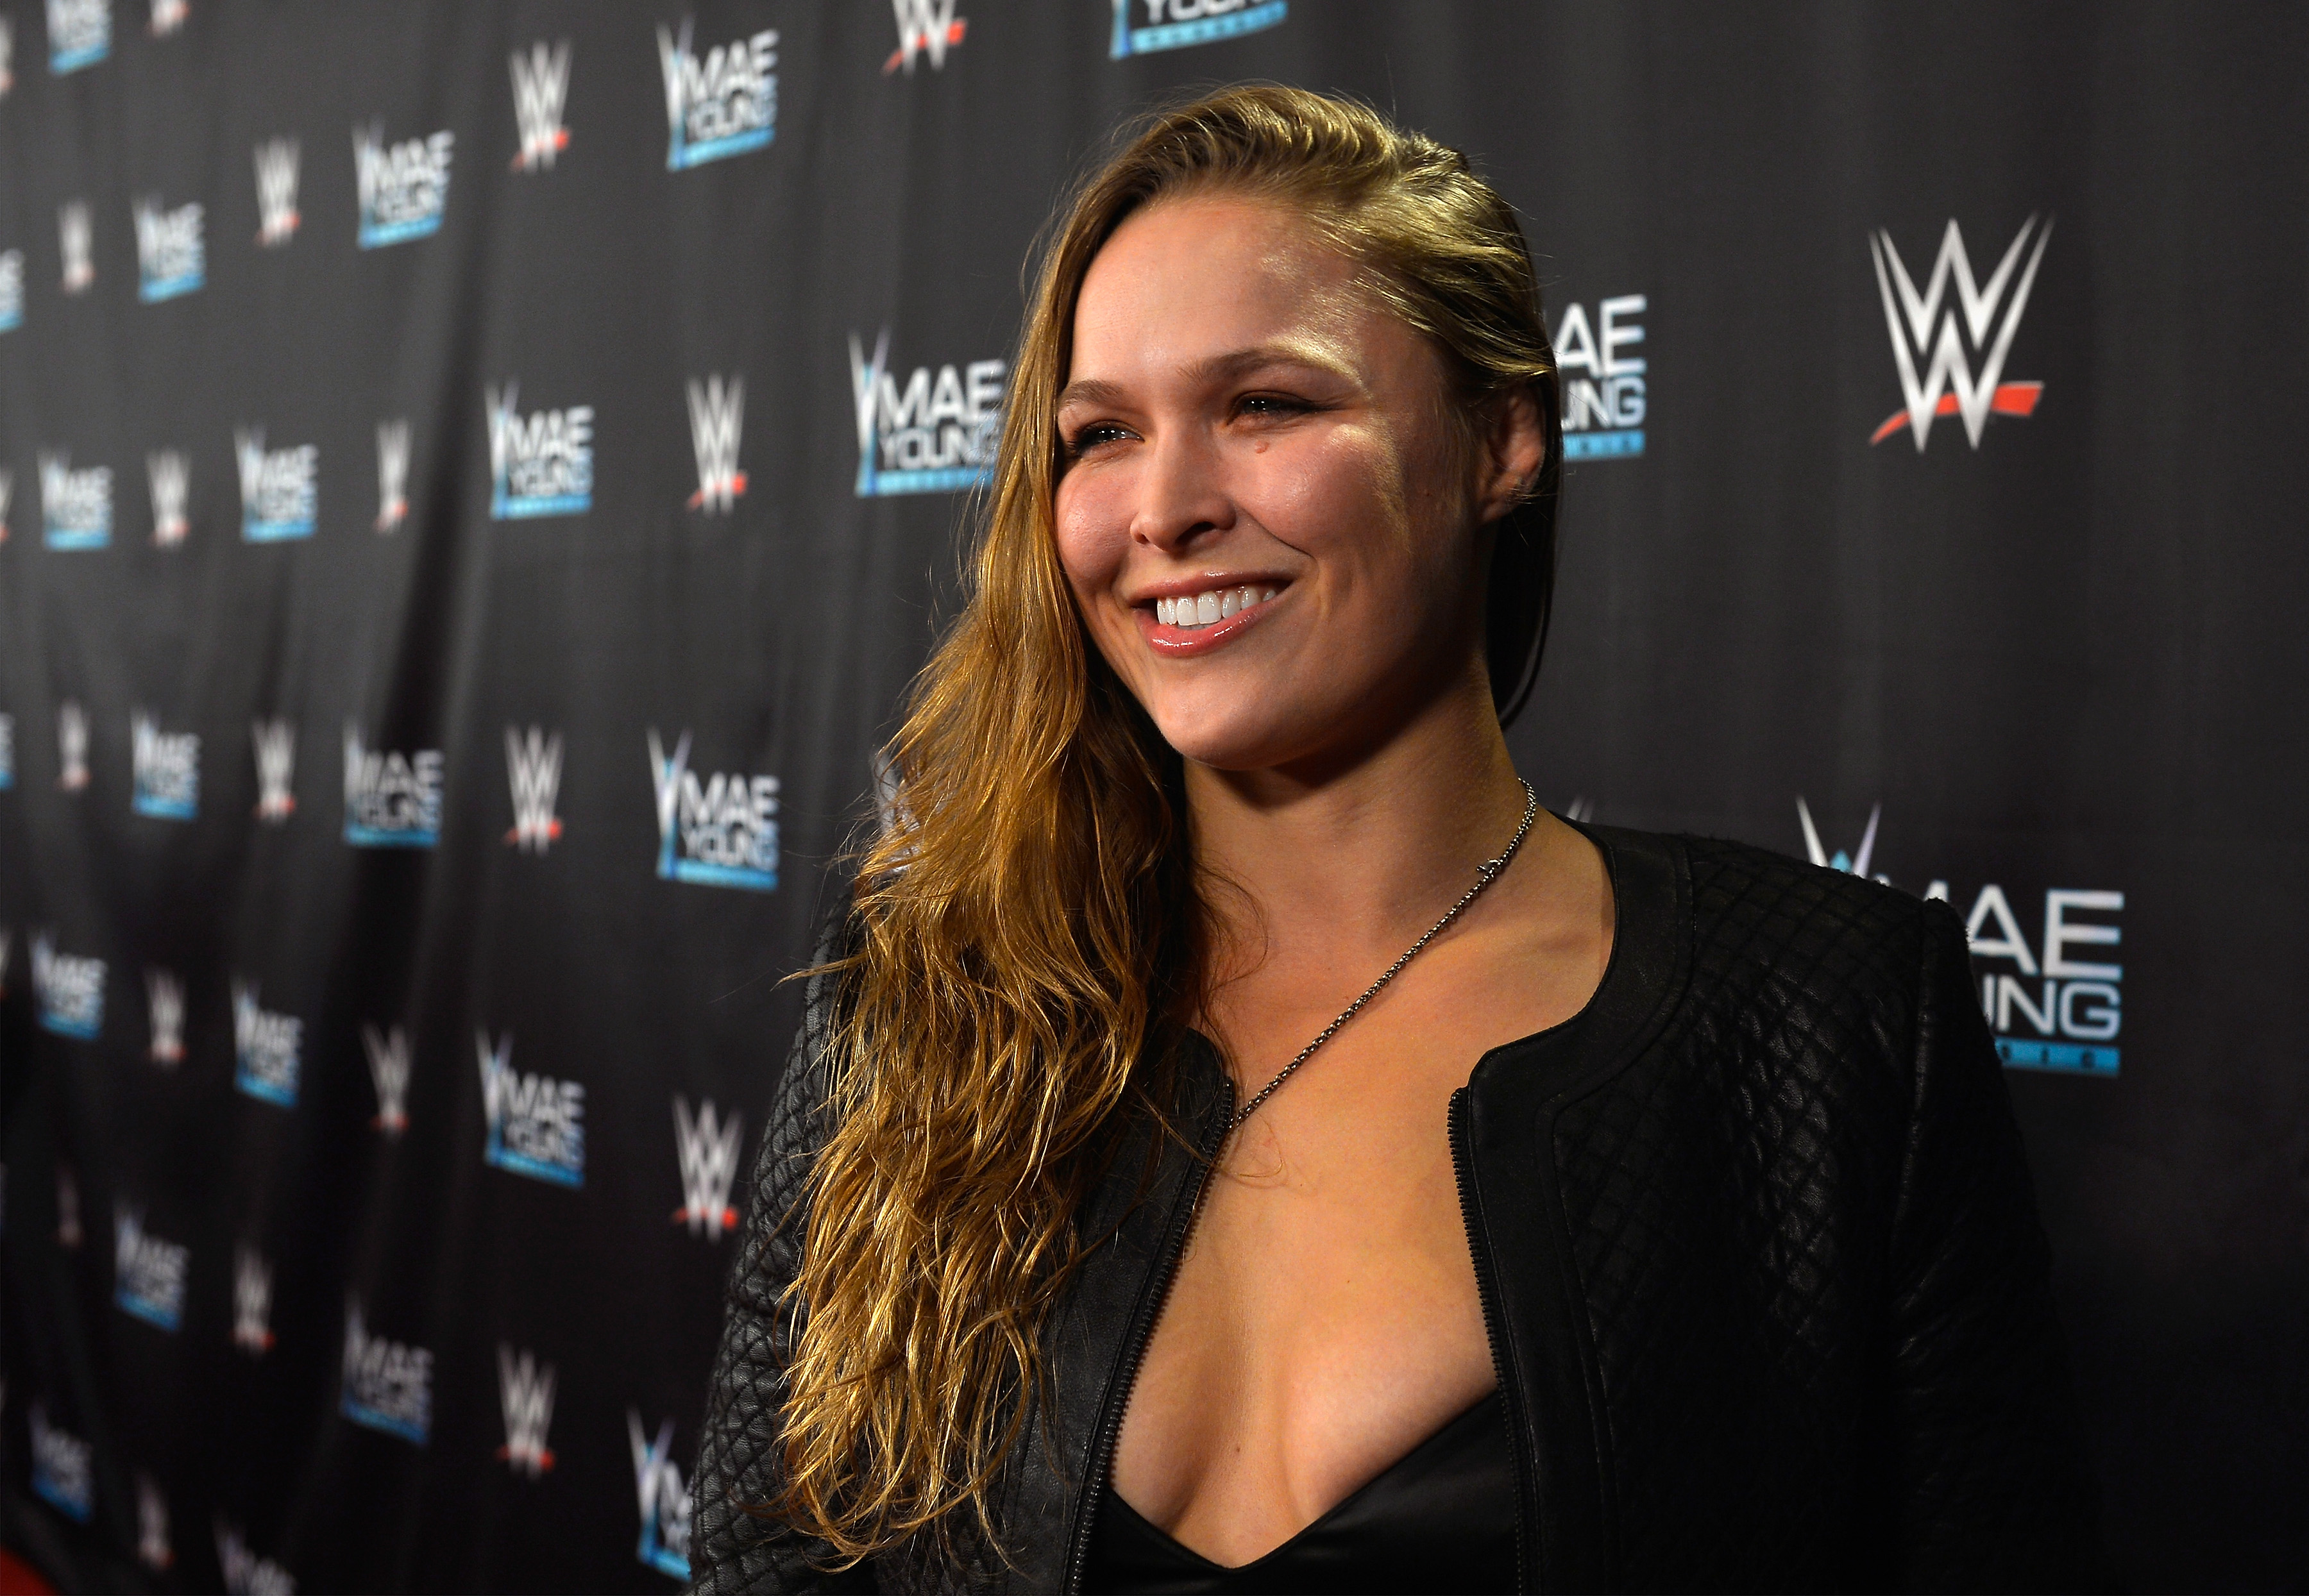 Ronda Rousey poses for a photo at a WWE event